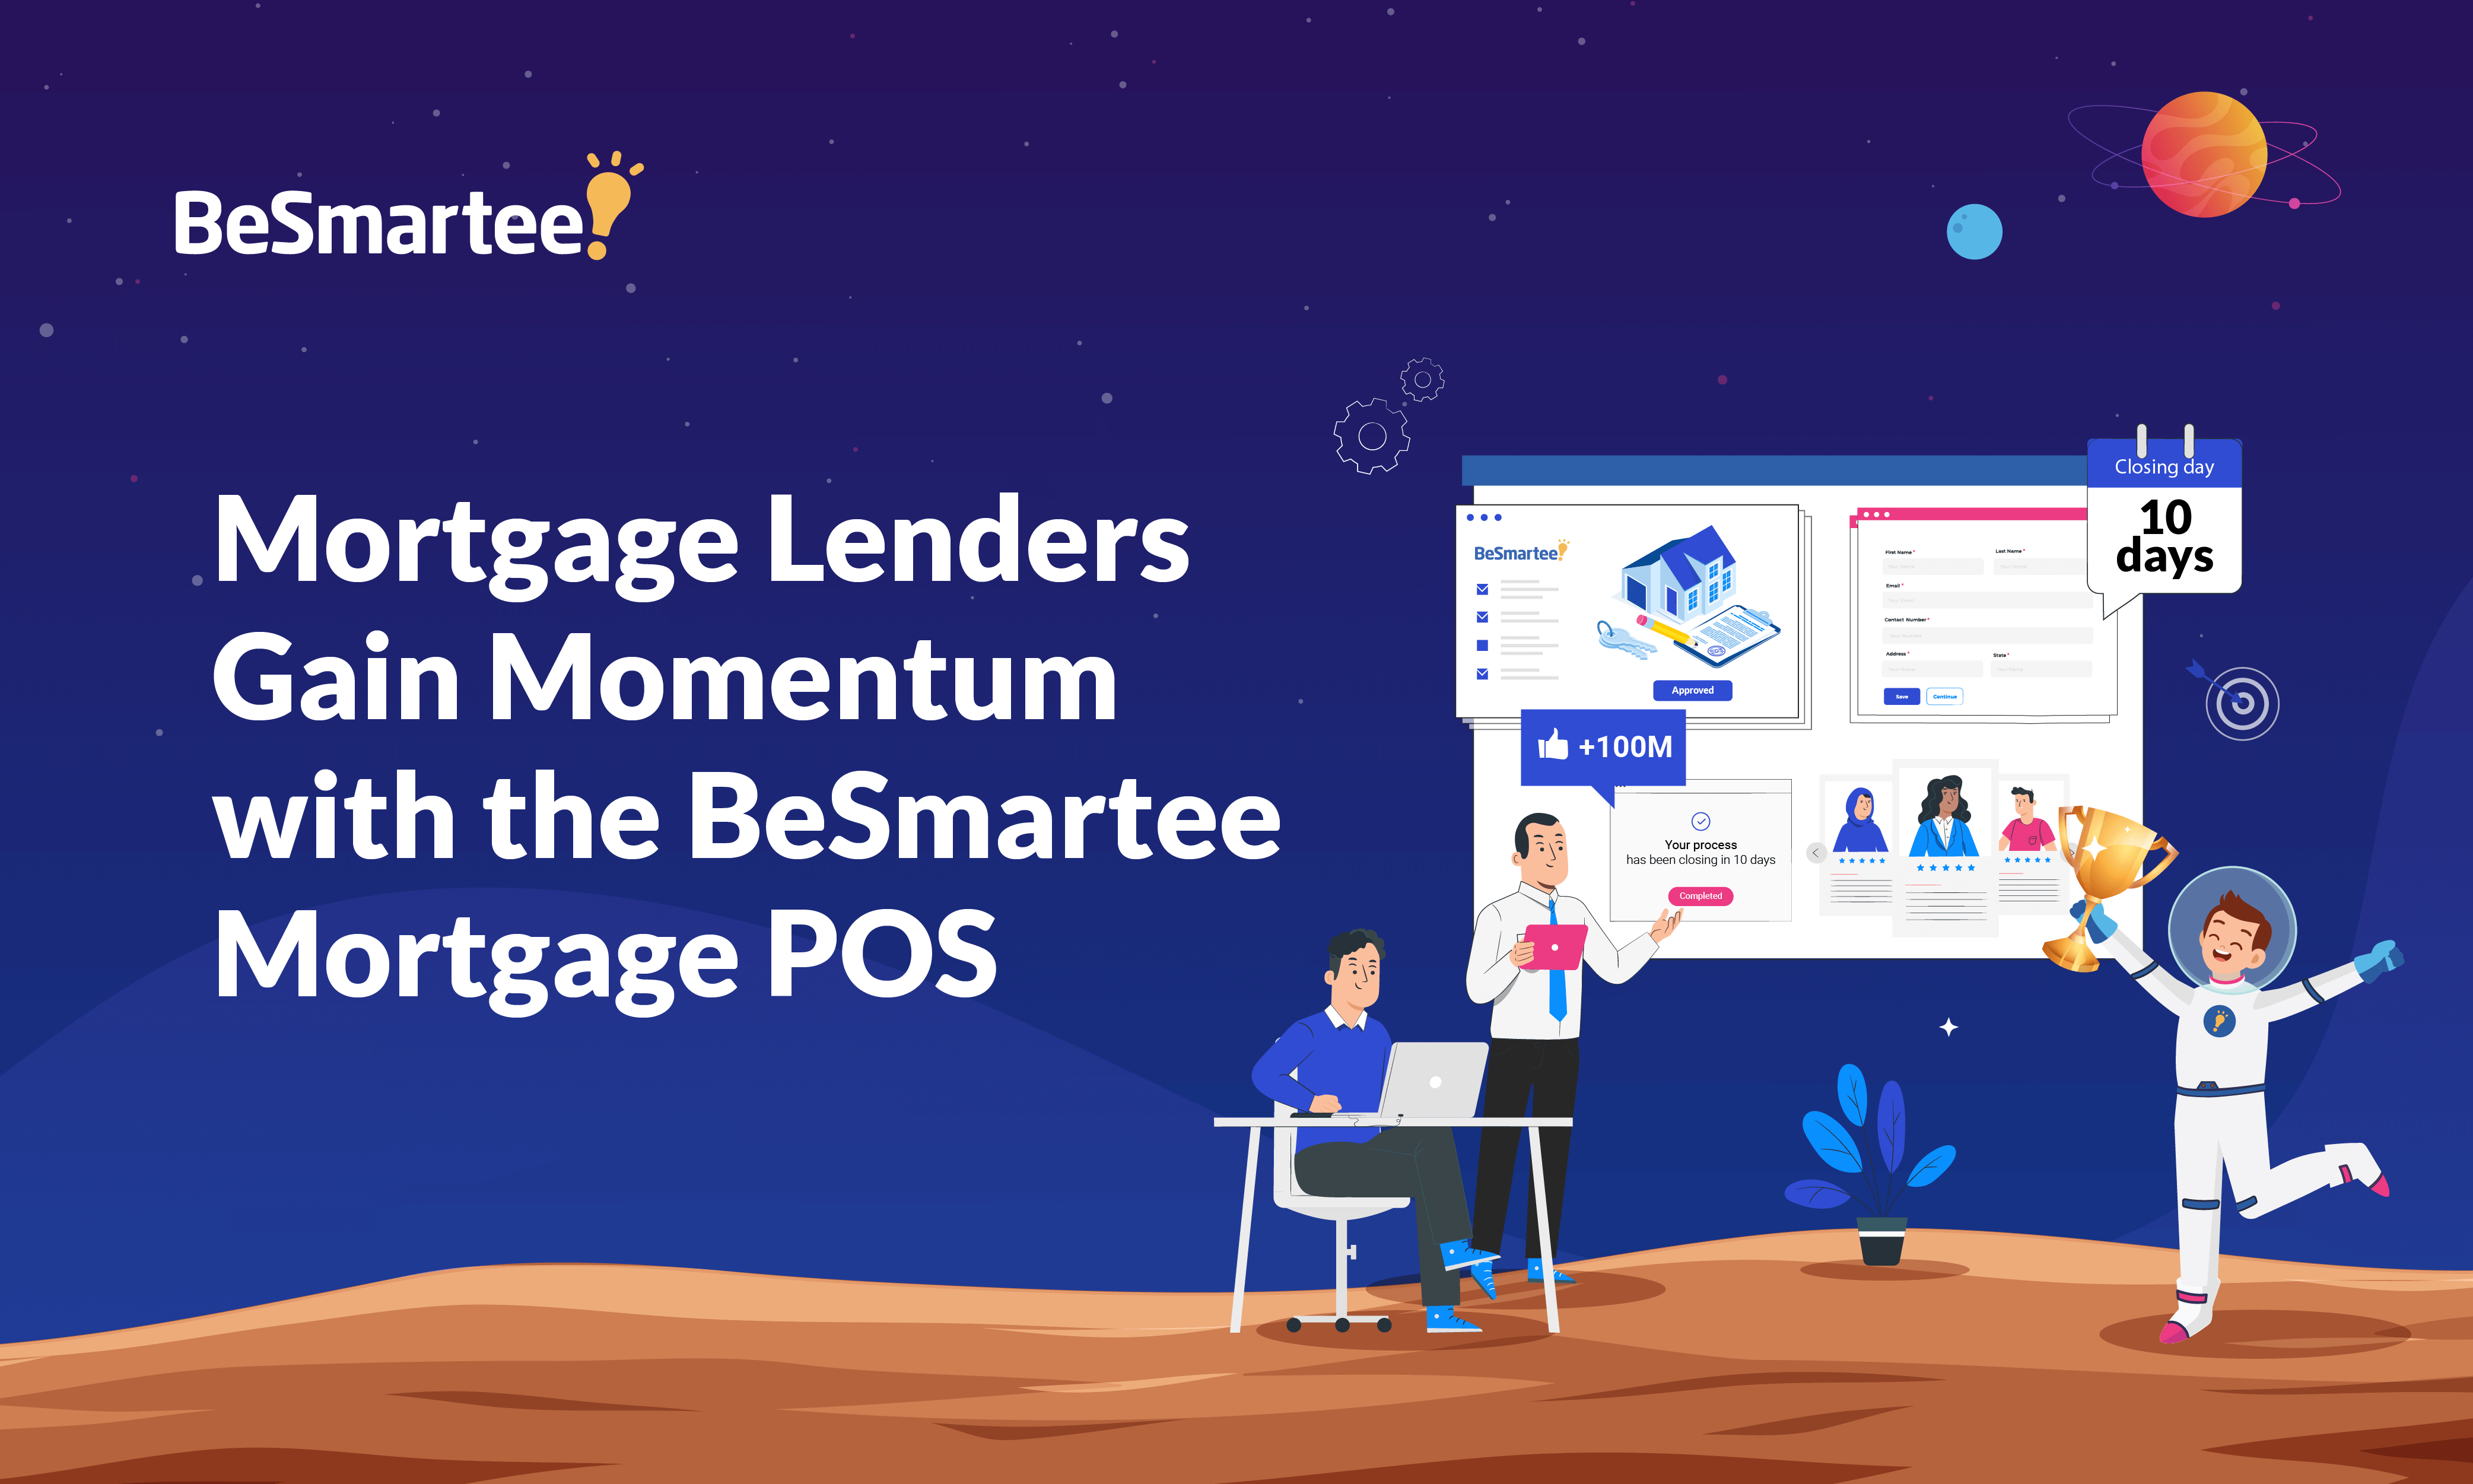 Mortgage Lenders Gain Momentum with the BeSmartee Mortgage POS